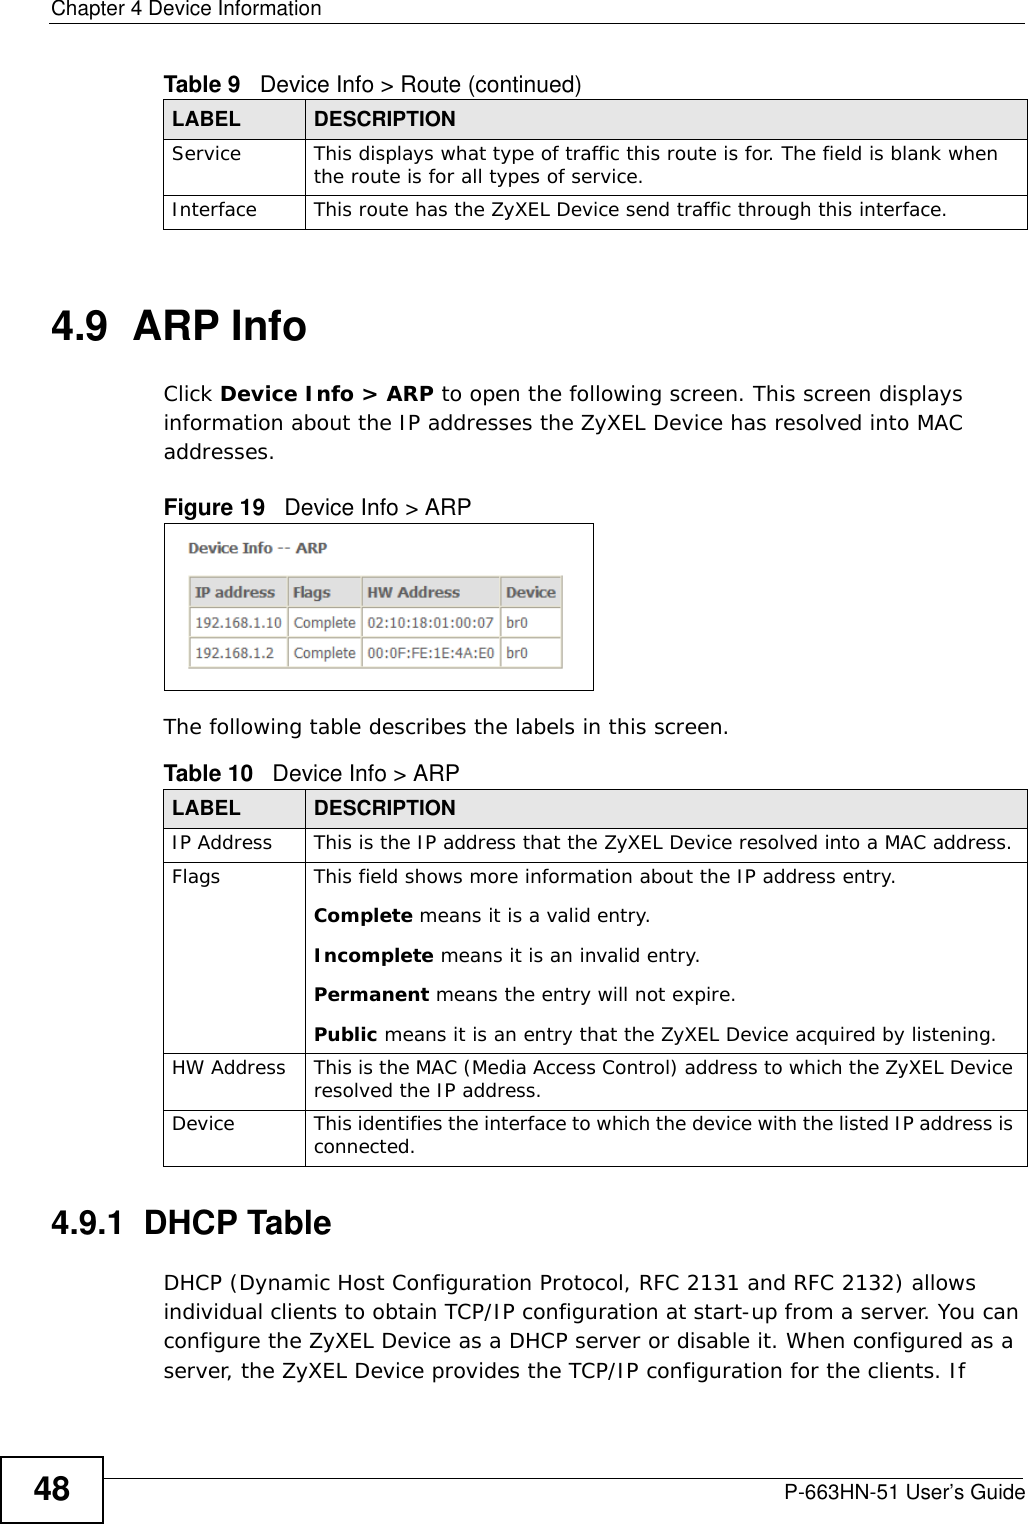 Chapter 4 Device InformationP-663HN-51 User’s Guide484.9  ARP InfoClick Device Info &gt; ARP to open the following screen. This screen displays information about the IP addresses the ZyXEL Device has resolved into MAC addresses.  Figure 19   Device Info &gt; ARP The following table describes the labels in this screen.4.9.1  DHCP Table DHCP (Dynamic Host Configuration Protocol, RFC 2131 and RFC 2132) allows individual clients to obtain TCP/IP configuration at start-up from a server. You can configure the ZyXEL Device as a DHCP server or disable it. When configured as a server, the ZyXEL Device provides the TCP/IP configuration for the clients. If Service This displays what type of traffic this route is for. The field is blank when the route is for all types of service.Interface This route has the ZyXEL Device send traffic through this interface.Table 9   Device Info &gt; Route (continued)LABEL  DESCRIPTIONTable 10   Device Info &gt; ARPLABEL  DESCRIPTIONIP Address This is the IP address that the ZyXEL Device resolved into a MAC address.Flags This field shows more information about the IP address entry.Complete means it is a valid entry.Incomplete means it is an invalid entry.Permanent means the entry will not expire.Public means it is an entry that the ZyXEL Device acquired by listening.HW Address This is the MAC (Media Access Control) address to which the ZyXEL Device resolved the IP address.Device This identifies the interface to which the device with the listed IP address is connected. 